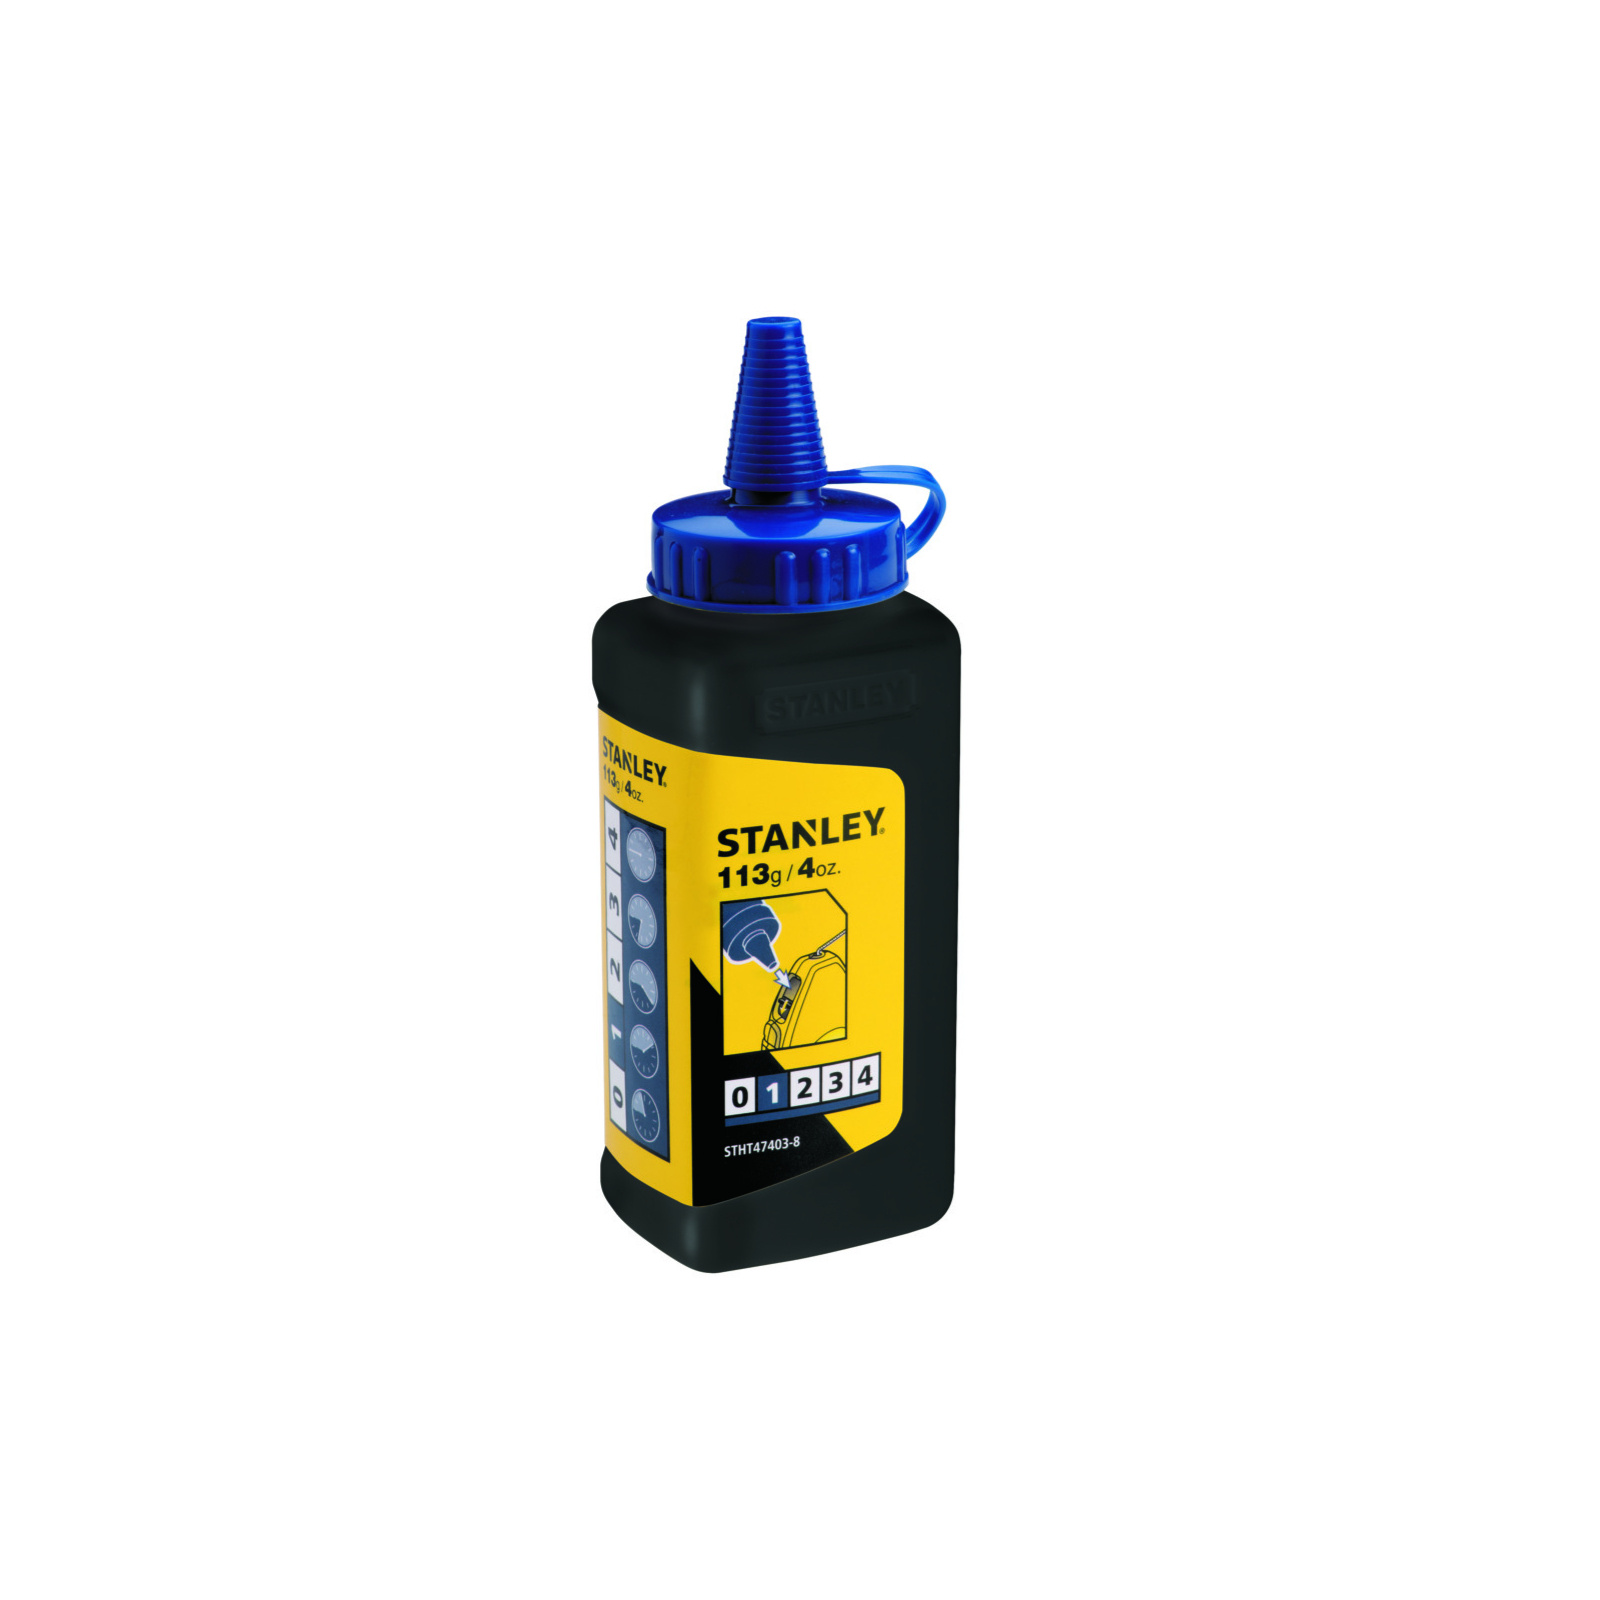 Stanley FatMax Extreme Chalk Box with 4 oz. Bottle of Blue Chalk